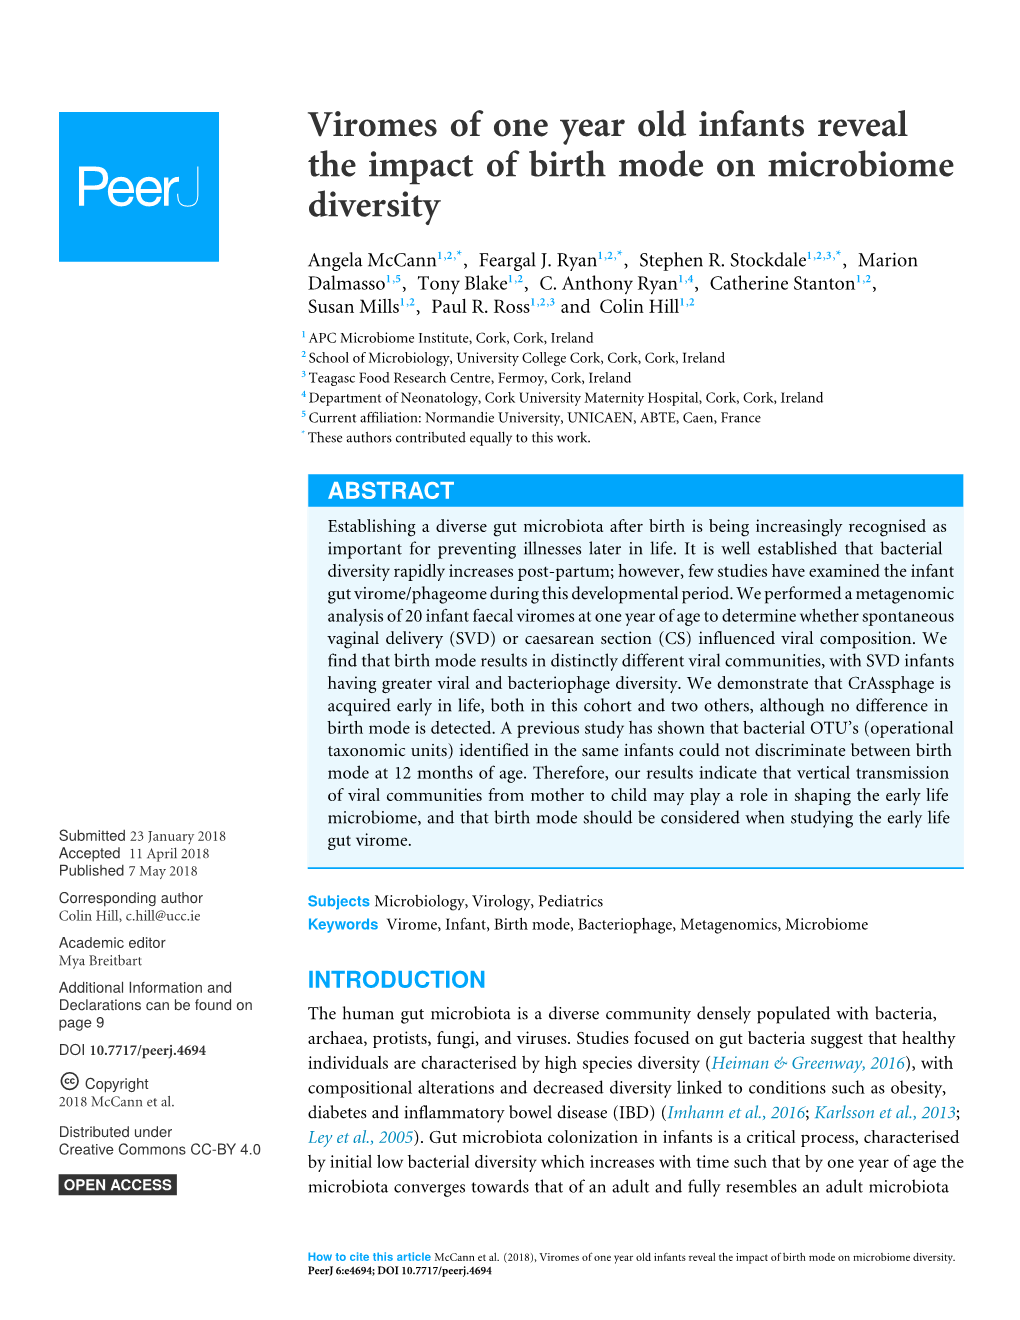 Viromes of One Year Old Infants Reveal the Impact of Birth Mode on Microbiome Diversity